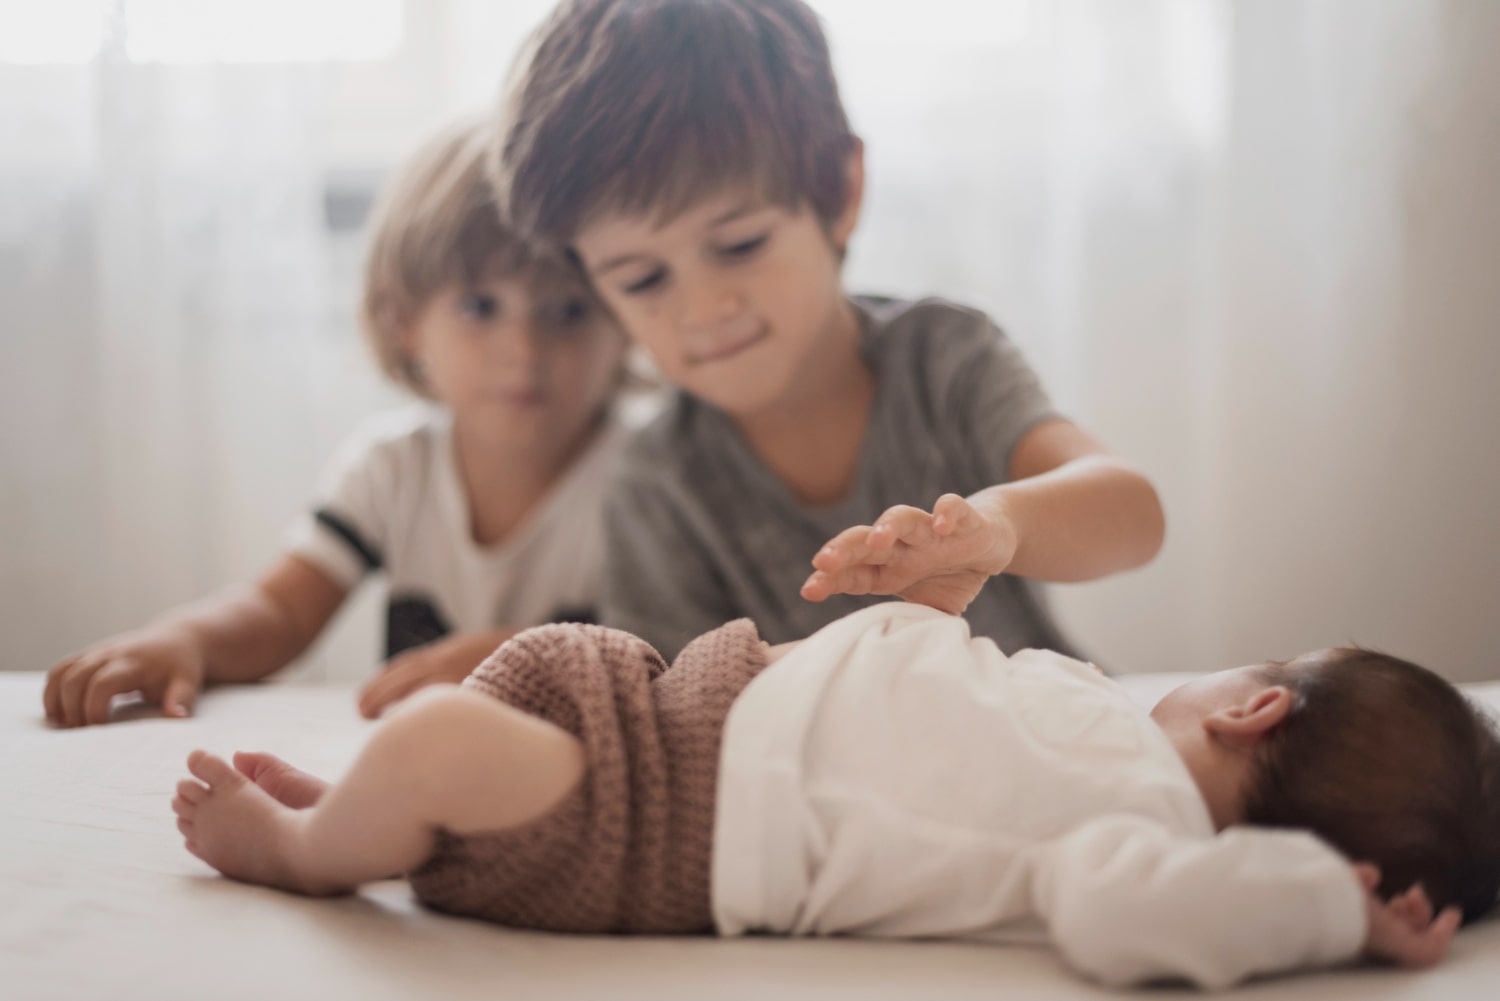 How To Deal With Toddler Hitting Younger Sibling